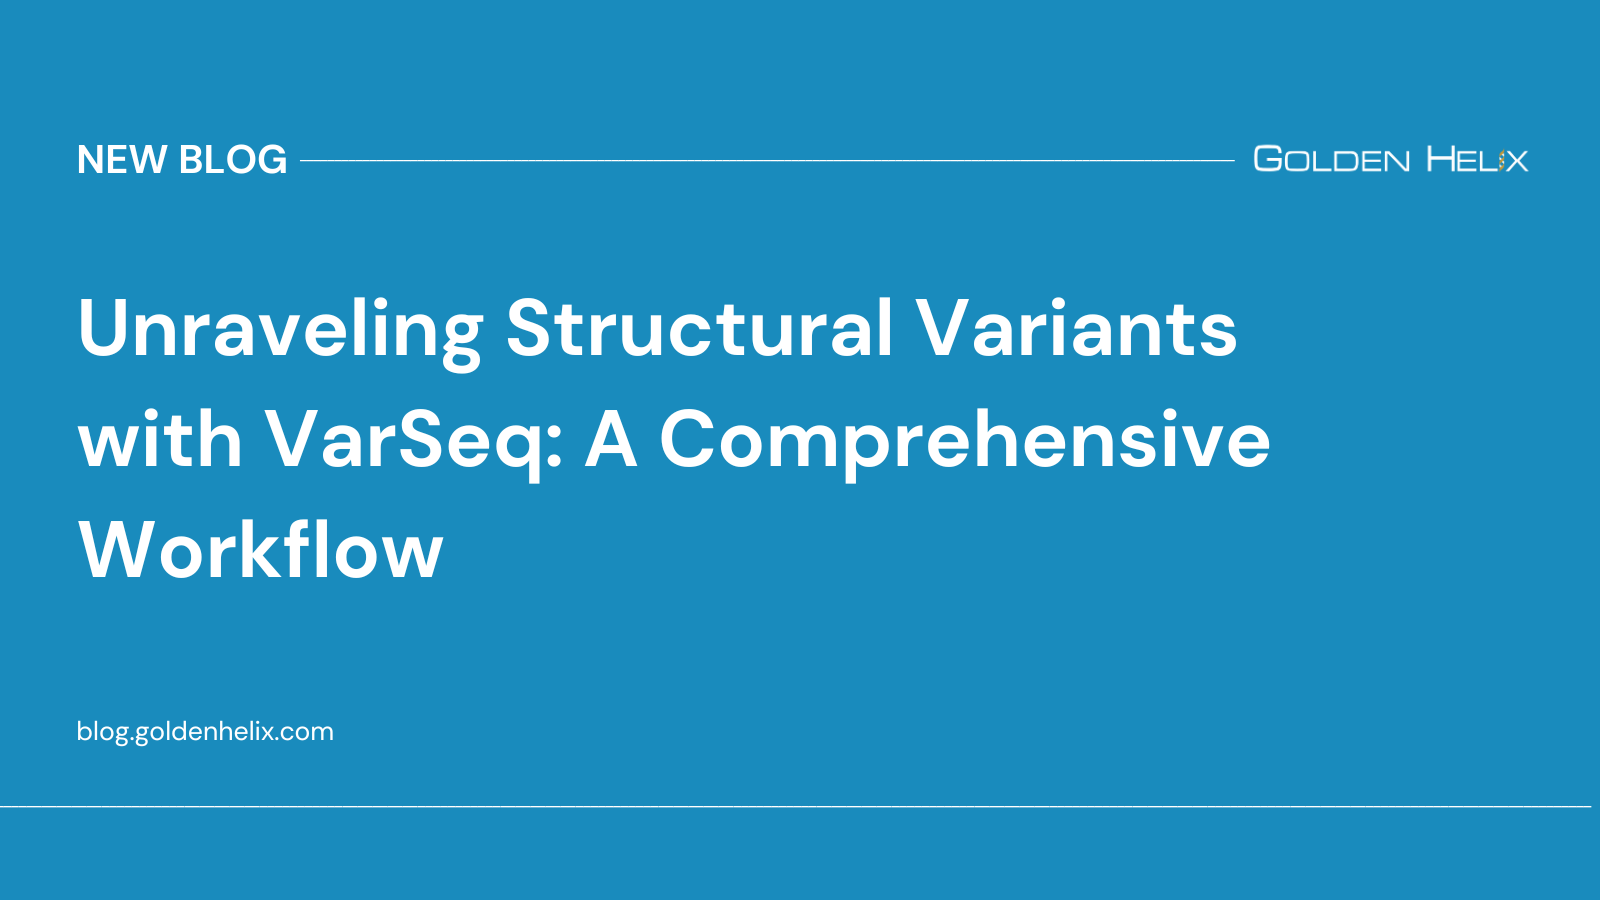 Unraveling Structural Variants with VarSeq: A Comprehensive Workflow